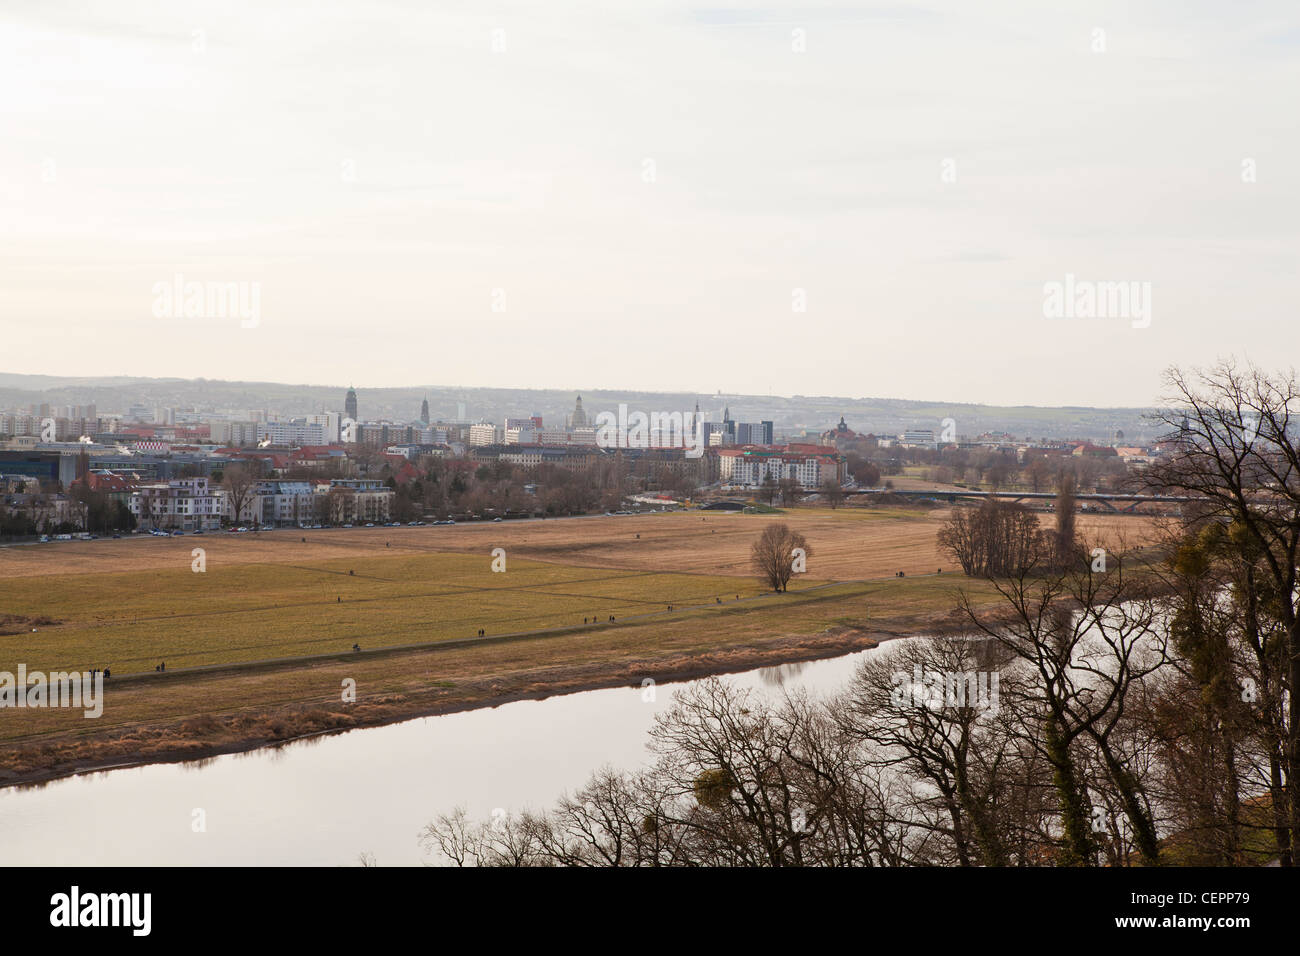 View of the River Elbe in Dresden from the Riverside Palace of Schloss Albrechtsberg. Stock Photo